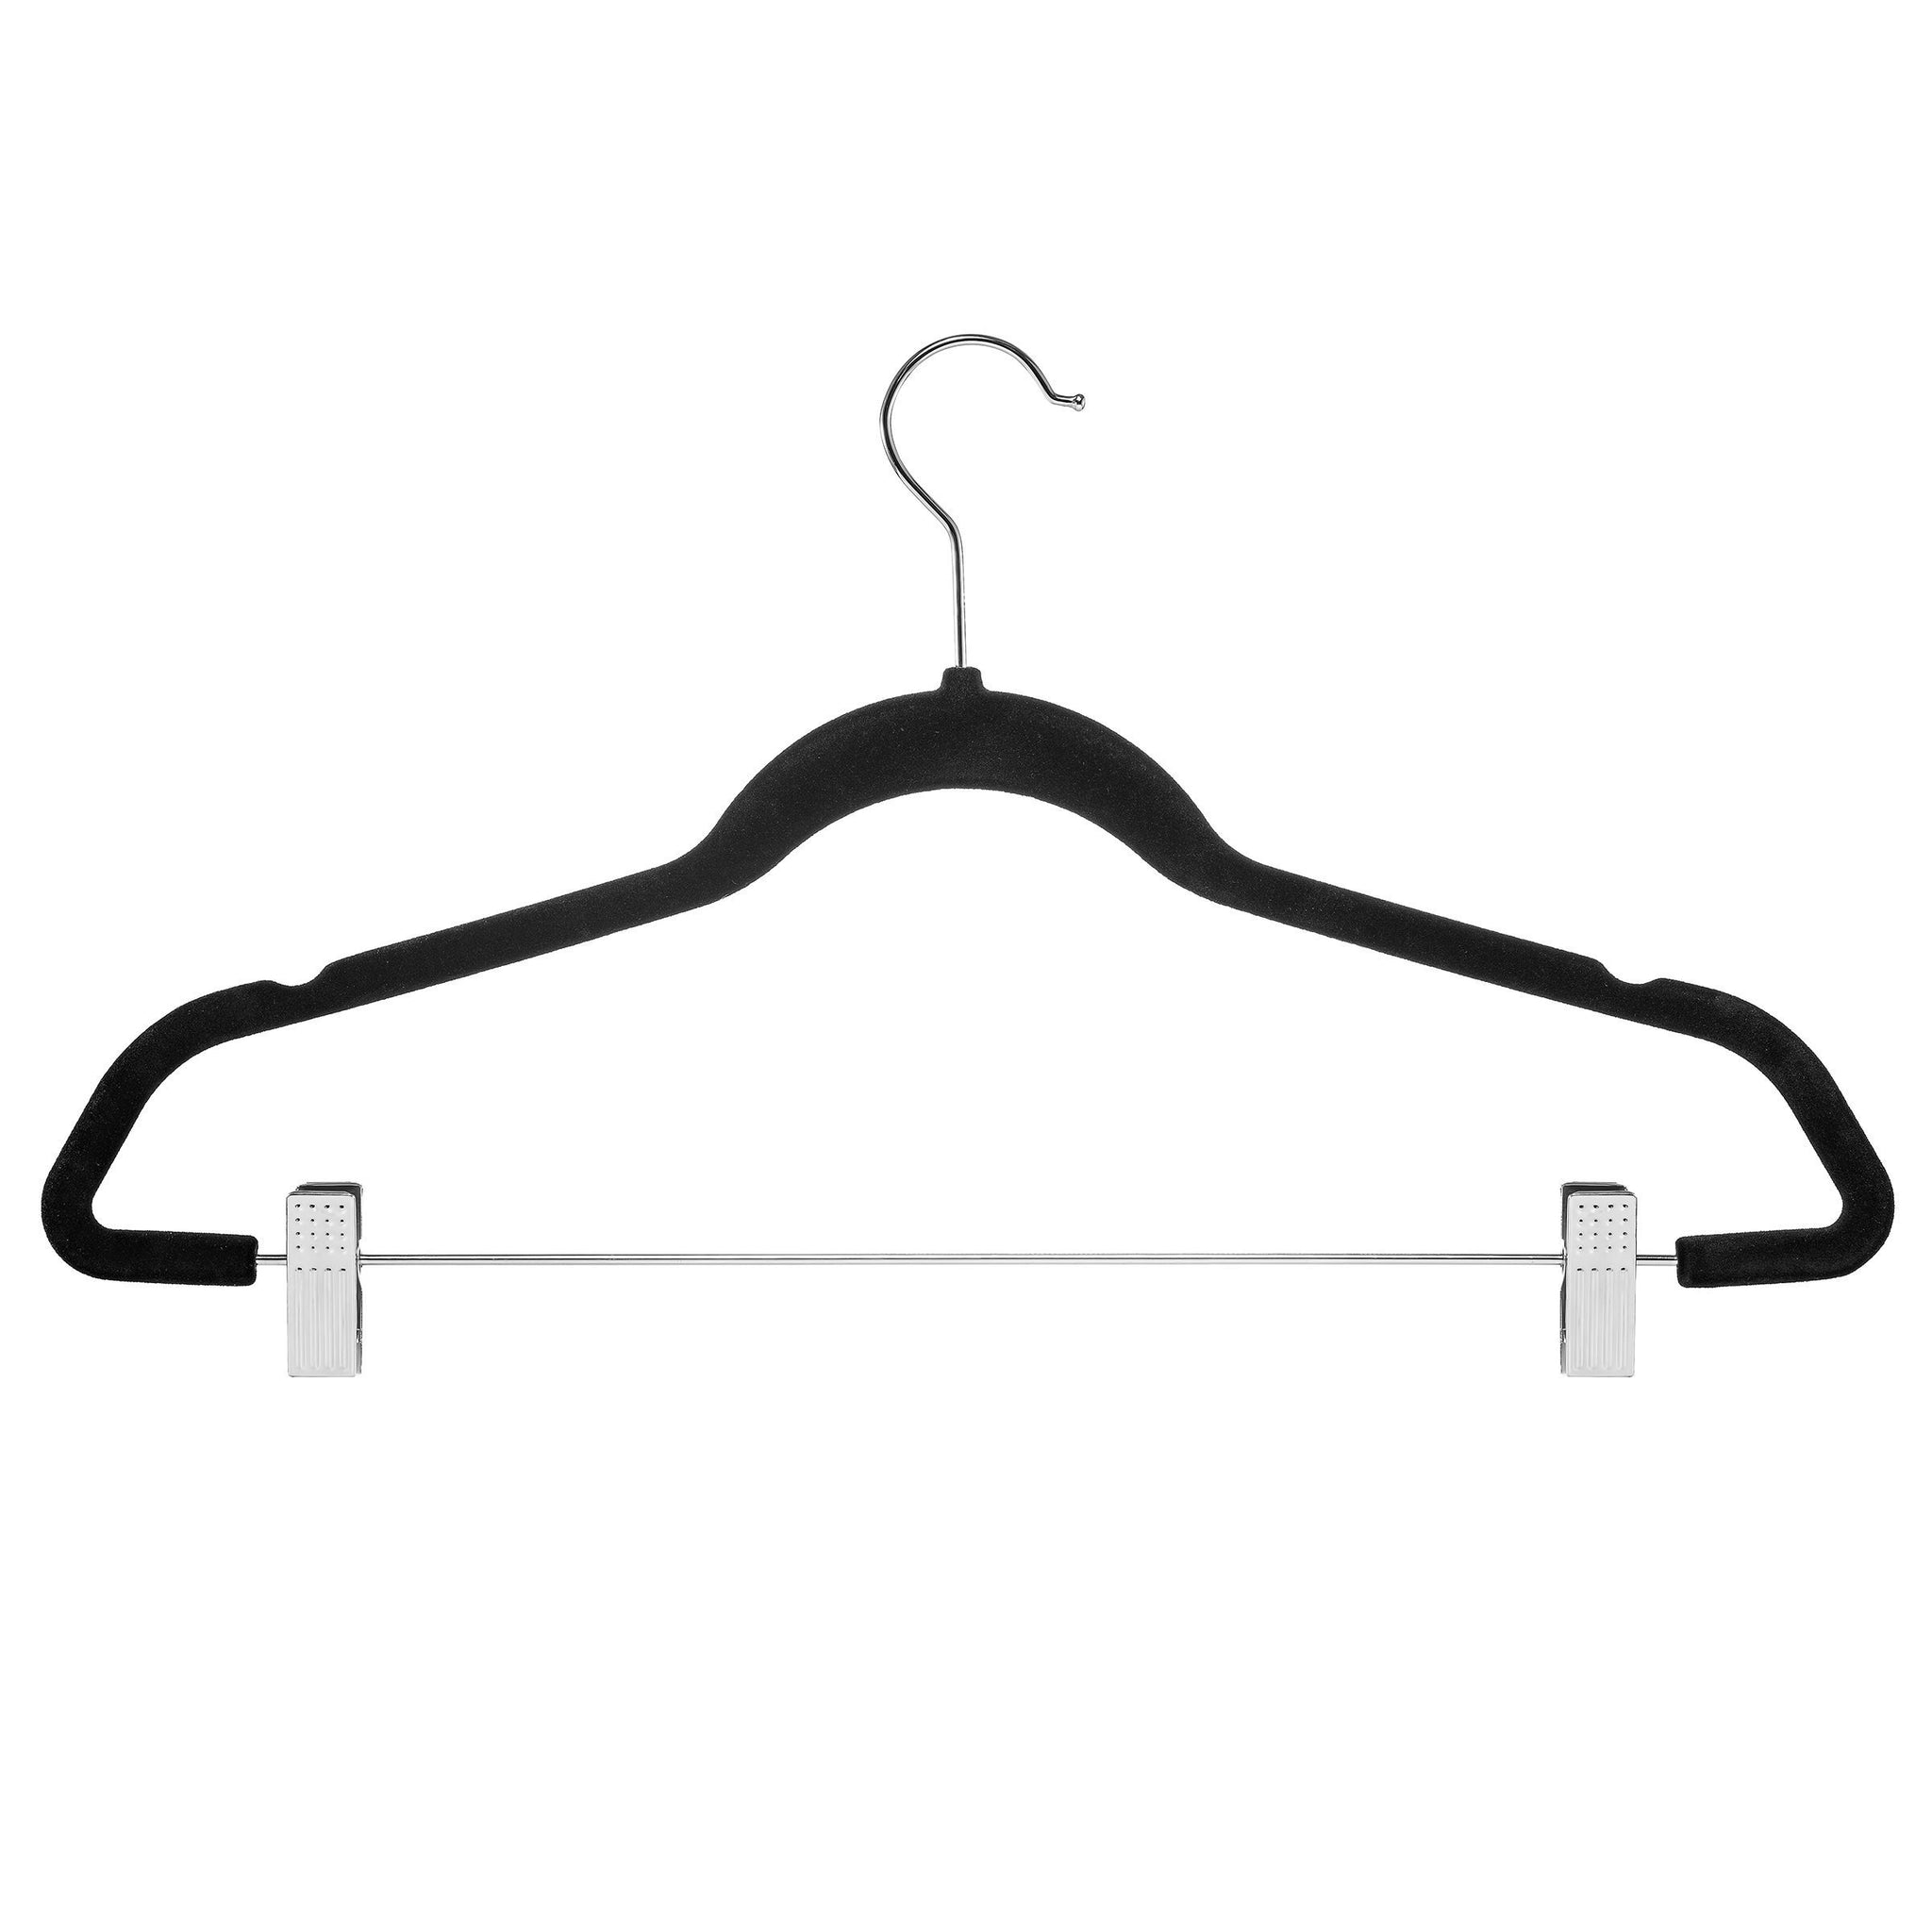 ZOBER Premium Quality Space Saving Velvet Pants Hangers Strong and Durable, with Metal Clips - 360 Degree Chrome Swivel Hook - Ultra Thin Non Slip Skirt Hangers, with Notches, 20 pack (Black)